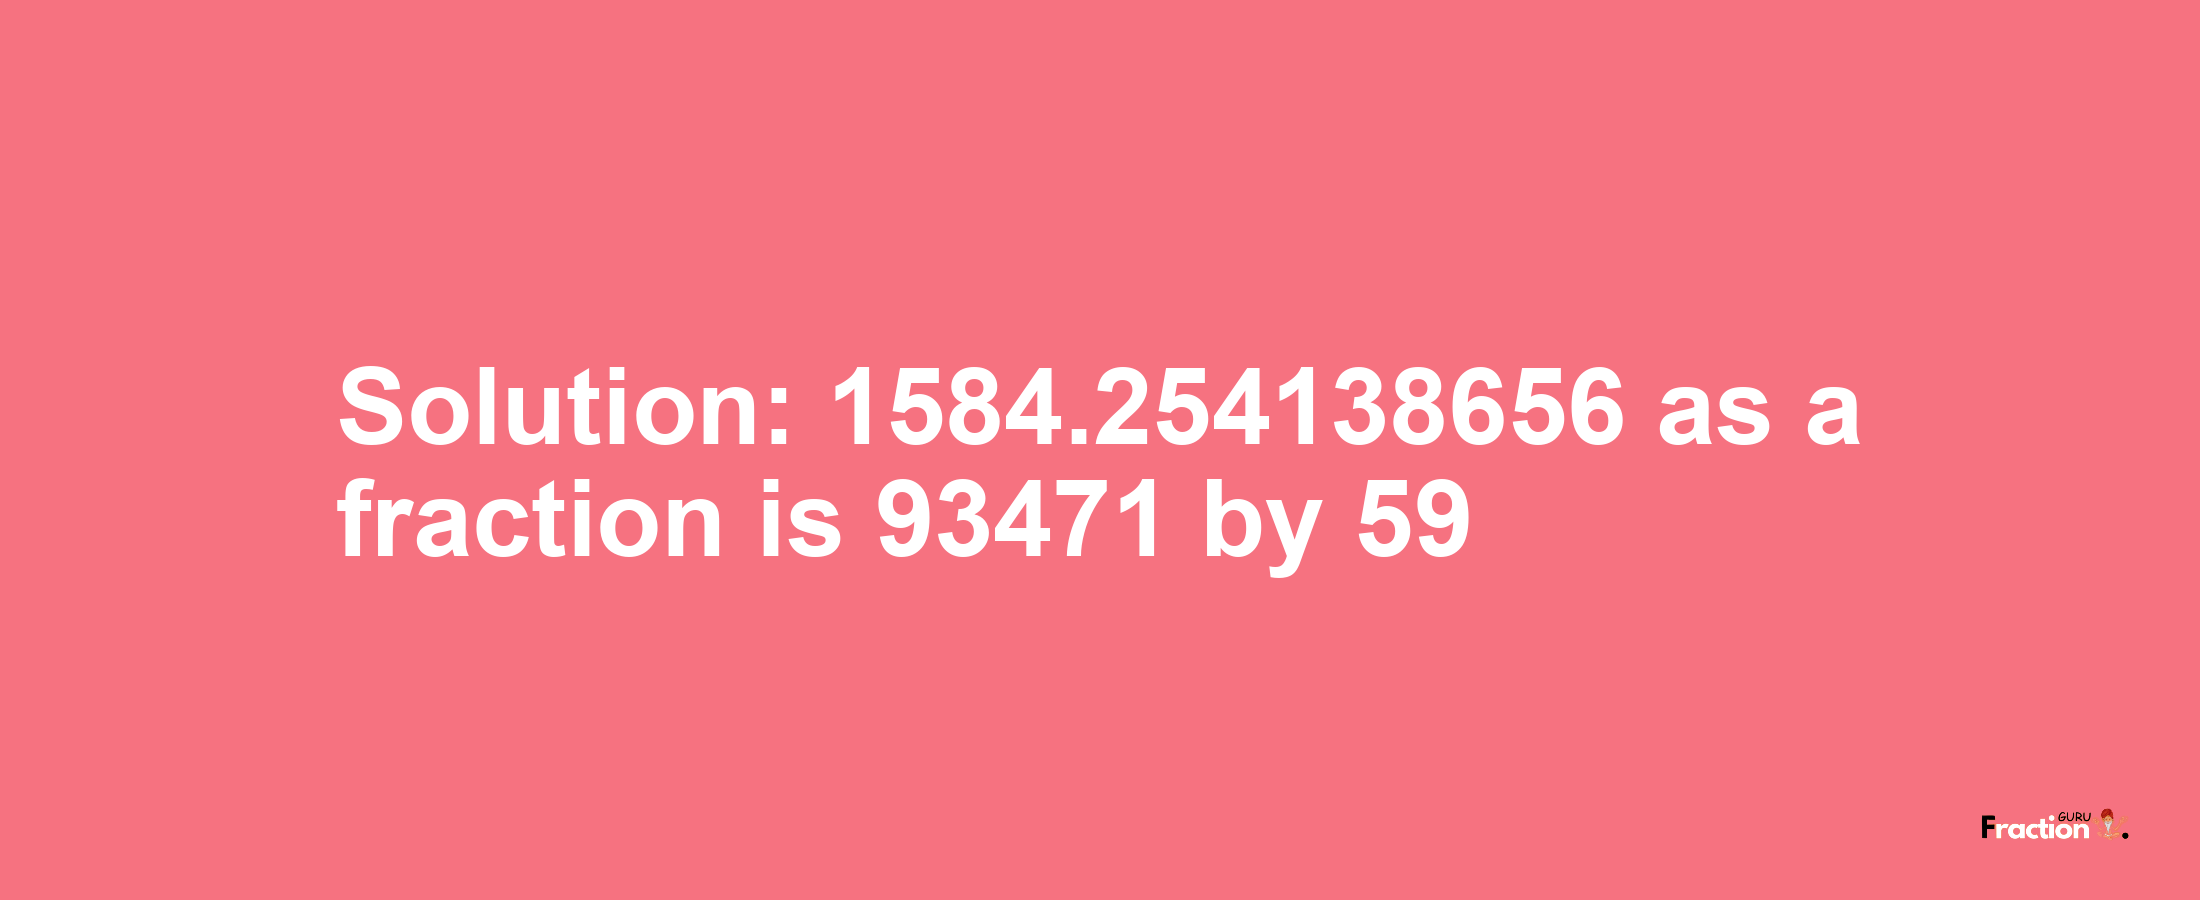 Solution:1584.254138656 as a fraction is 93471/59